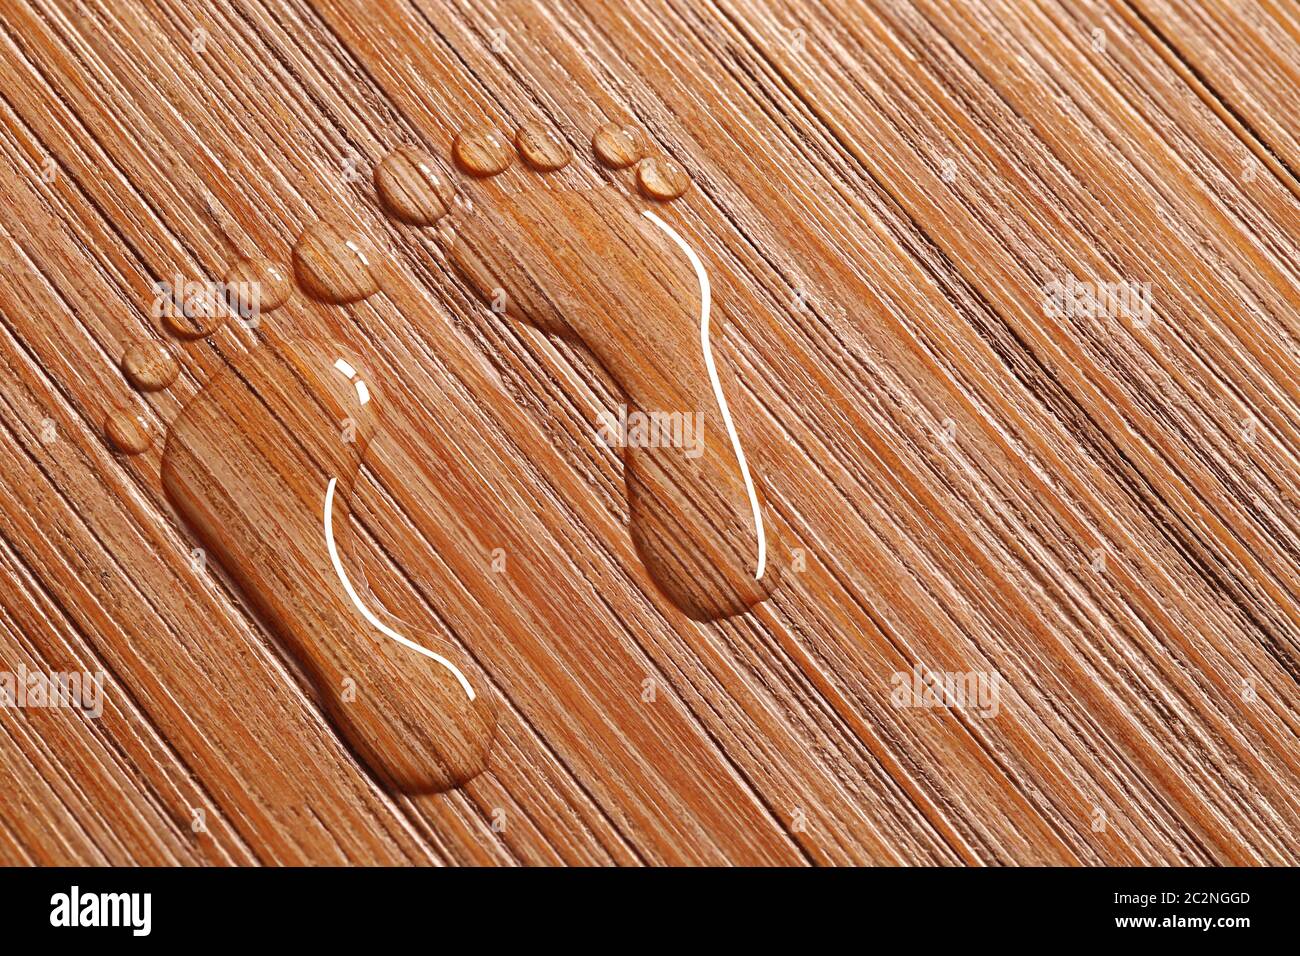 Symbol of two footprints on wood Stock Photo